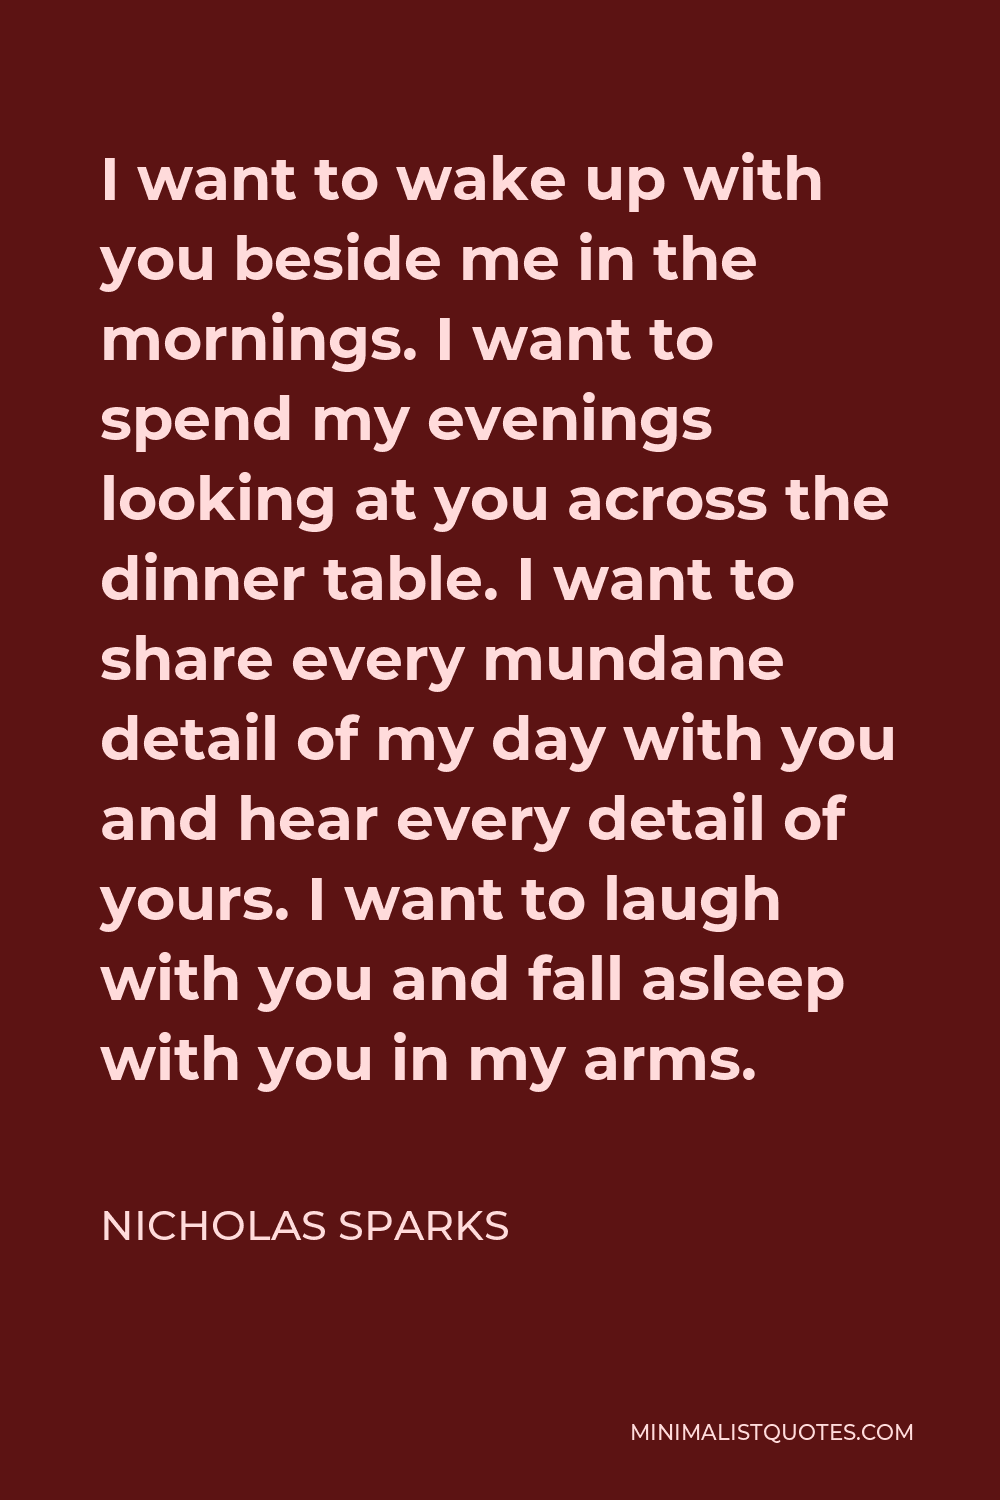 Nicholas Sparks Quote I Want To Wake Up With You Beside Me In The Mornings I Want To Spend My Evenings Looking At You Across The Dinner Table I Want To Share